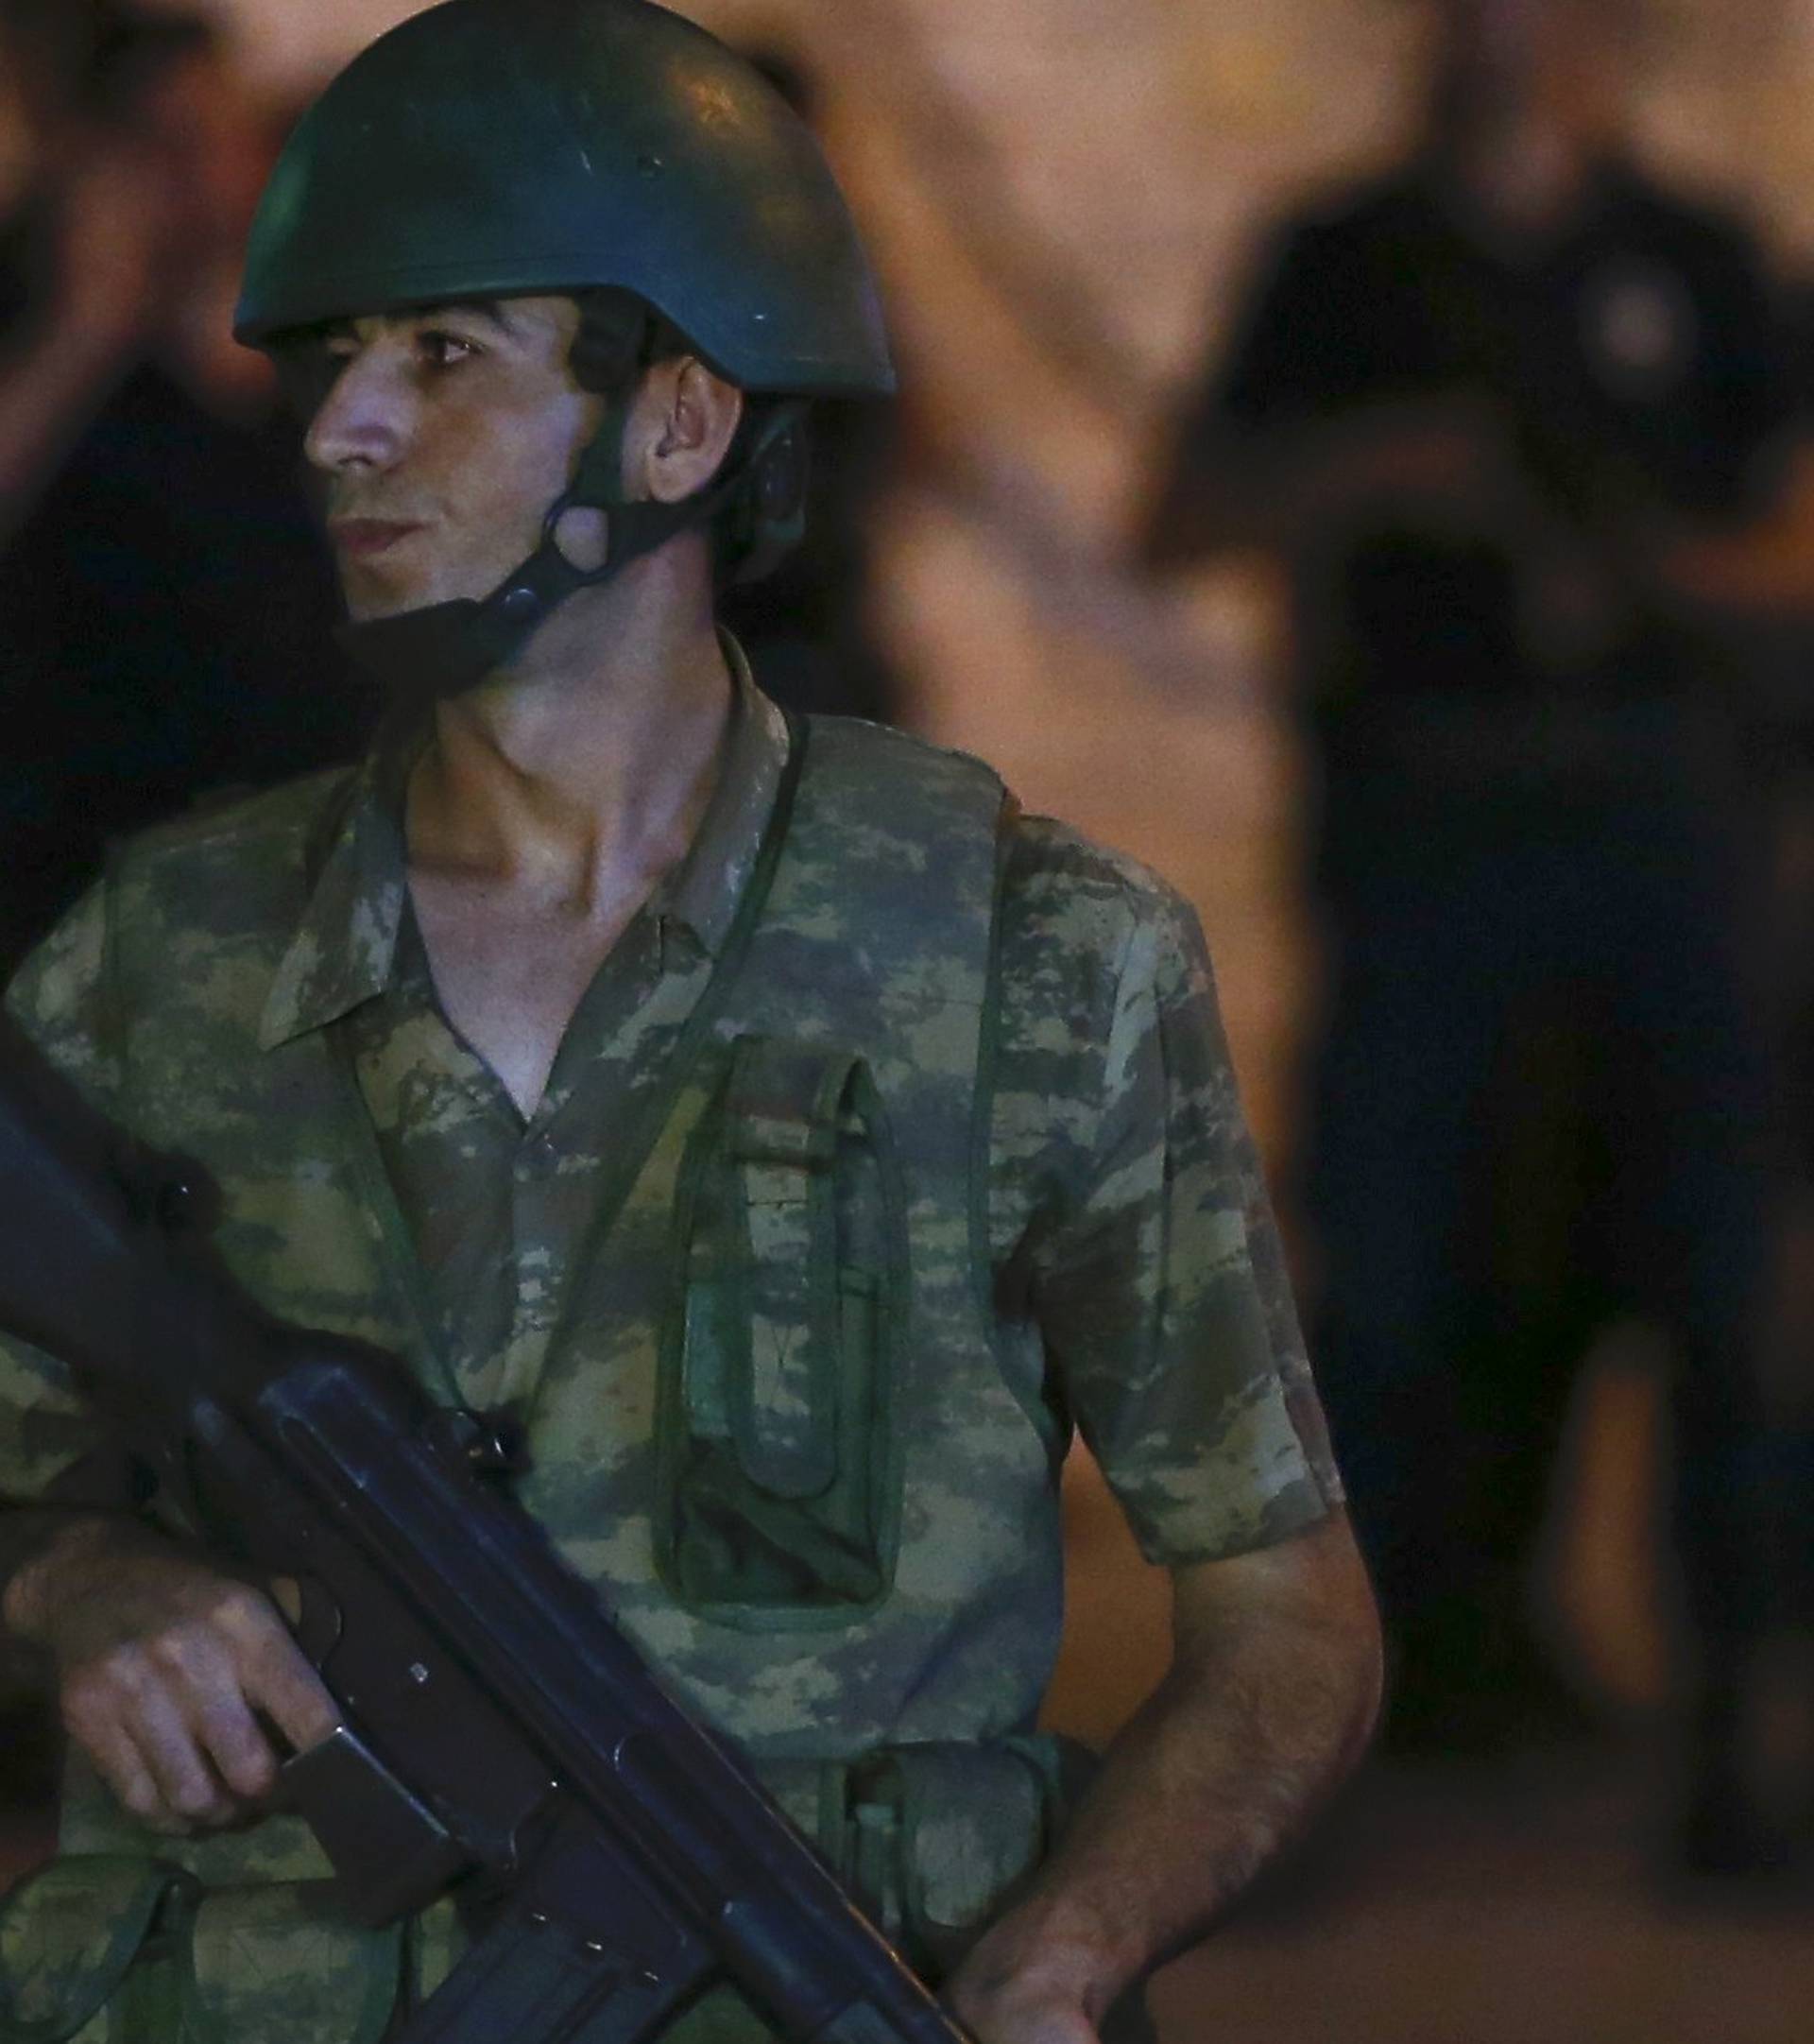 A Turkish military stands guard near the Taksim Square in Istanbul